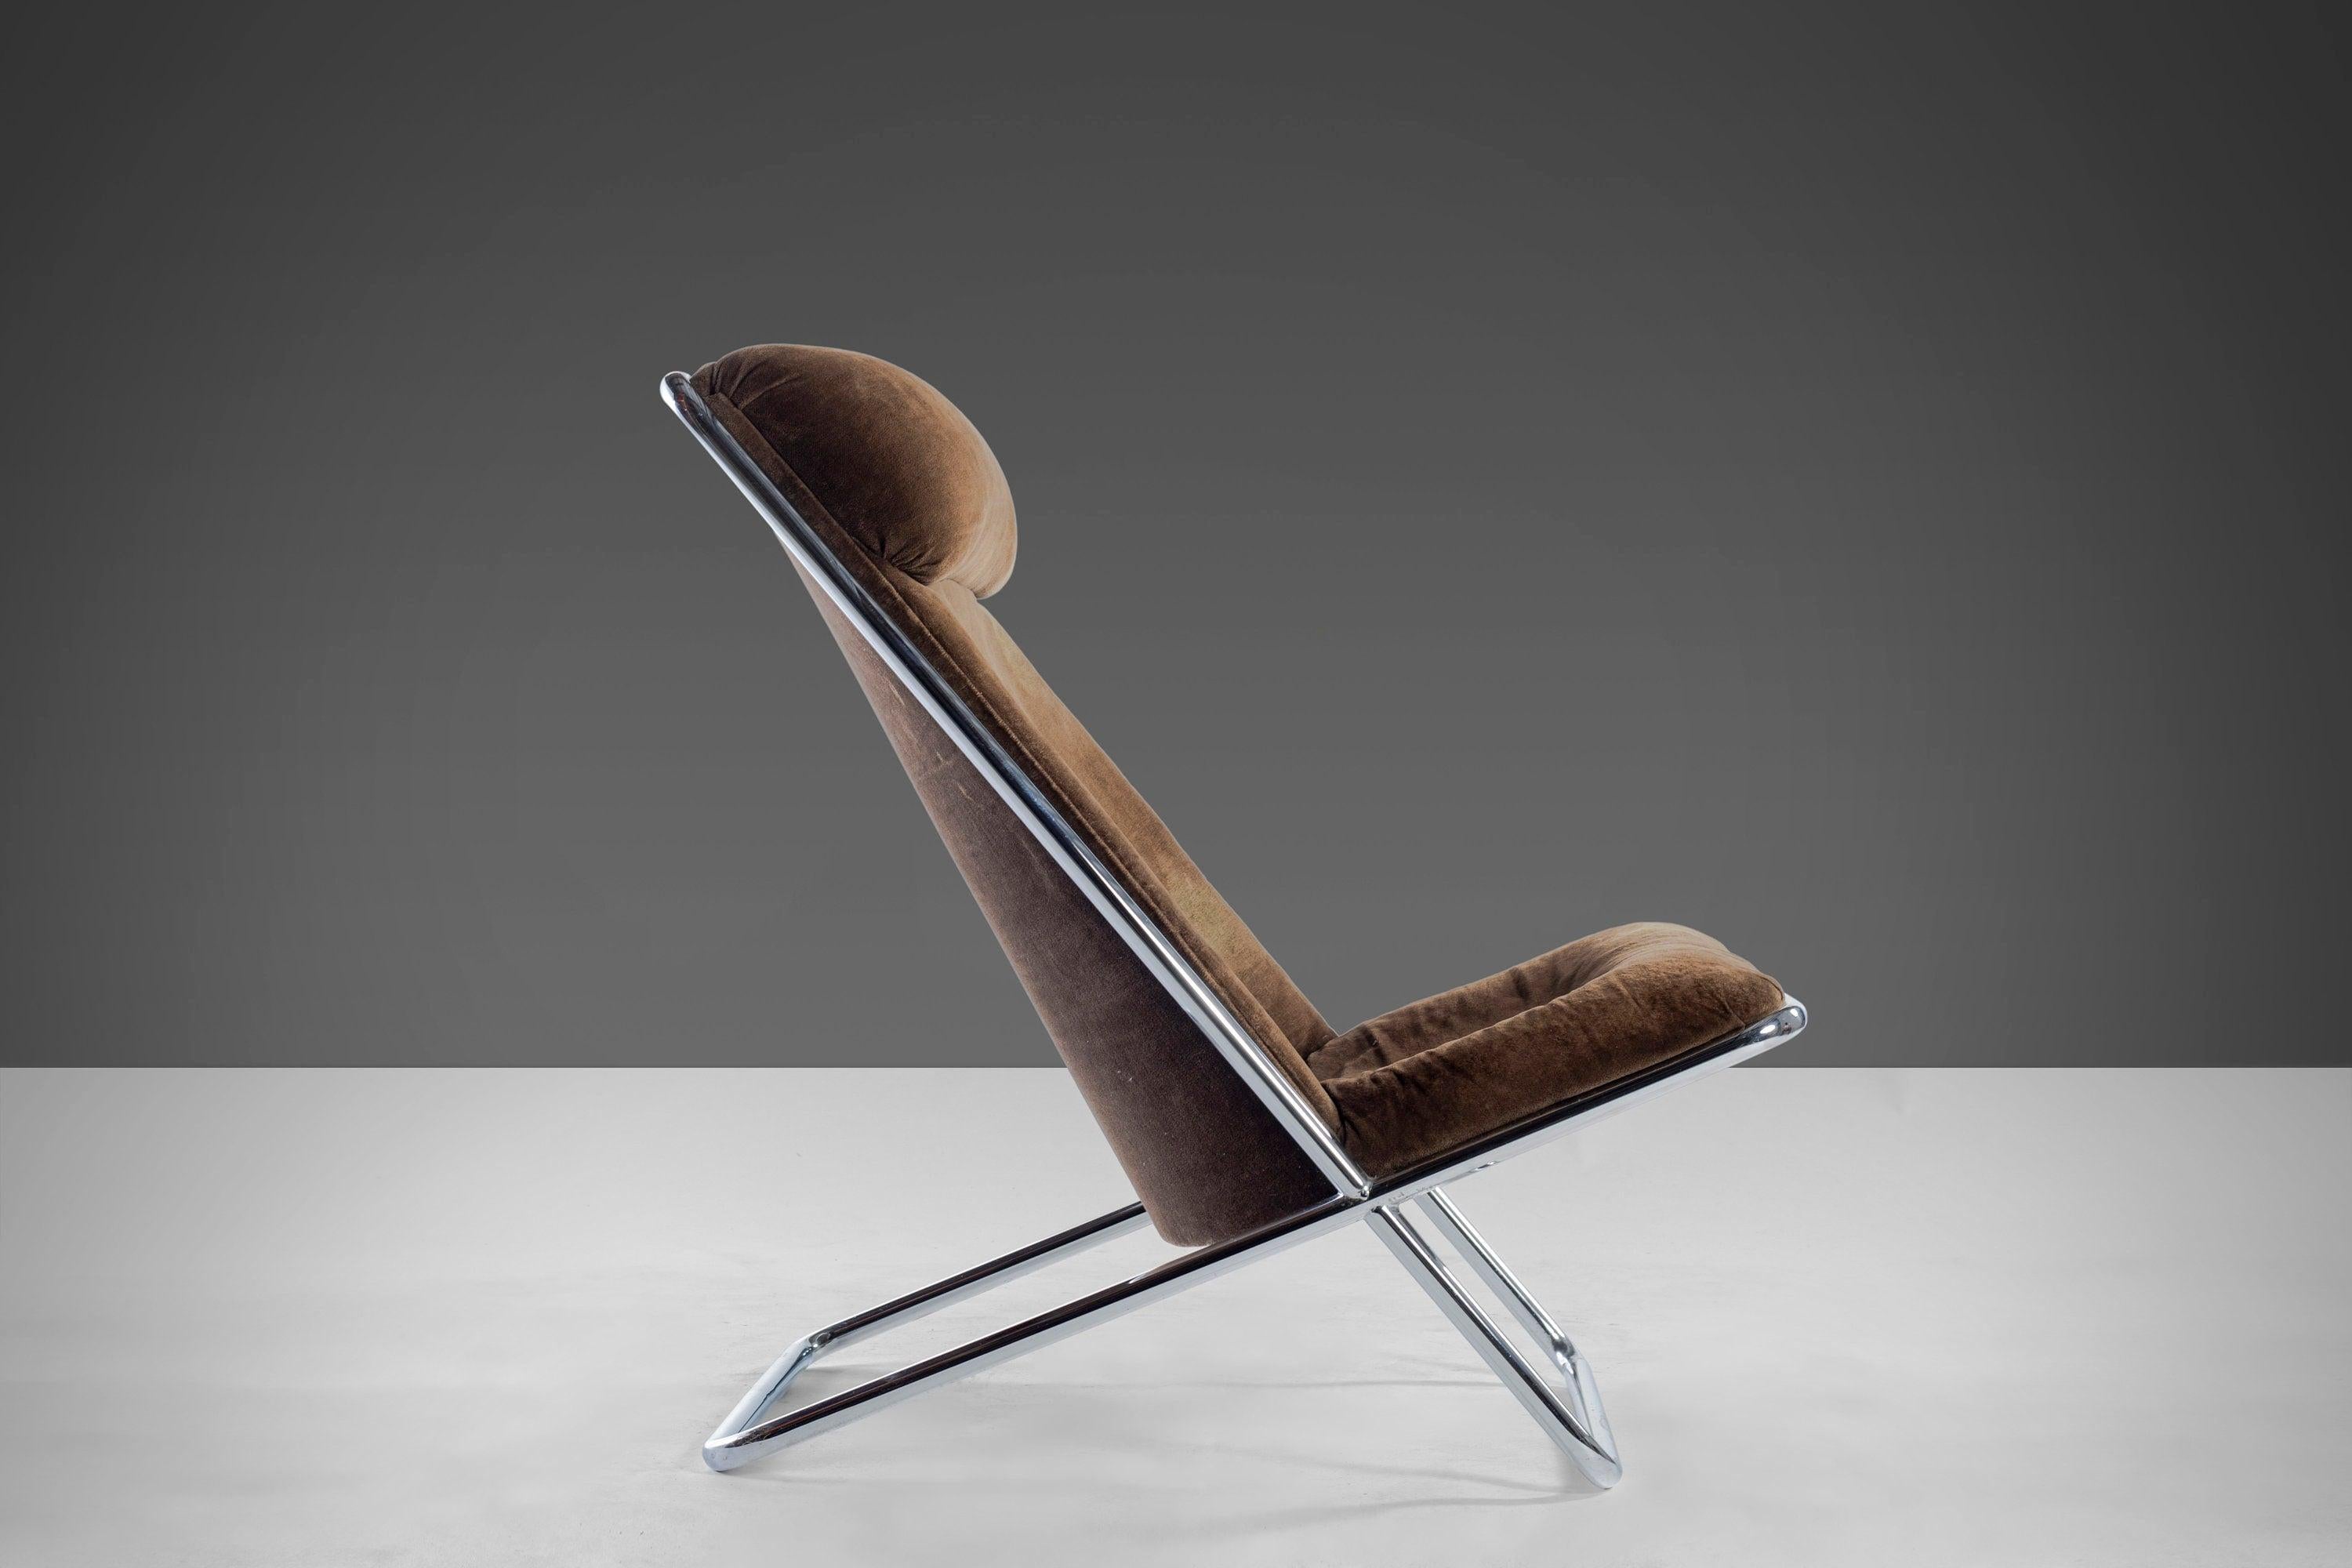 Designed by Ward Bennett with the perfect attention to angle and line. This Scissor lounge chair is found in original brown upholstery and rests on a striking chrome X base.

---Dimensions---

Width: 24.5 in / 62.23 cm
Depth: 36 in / 91.44